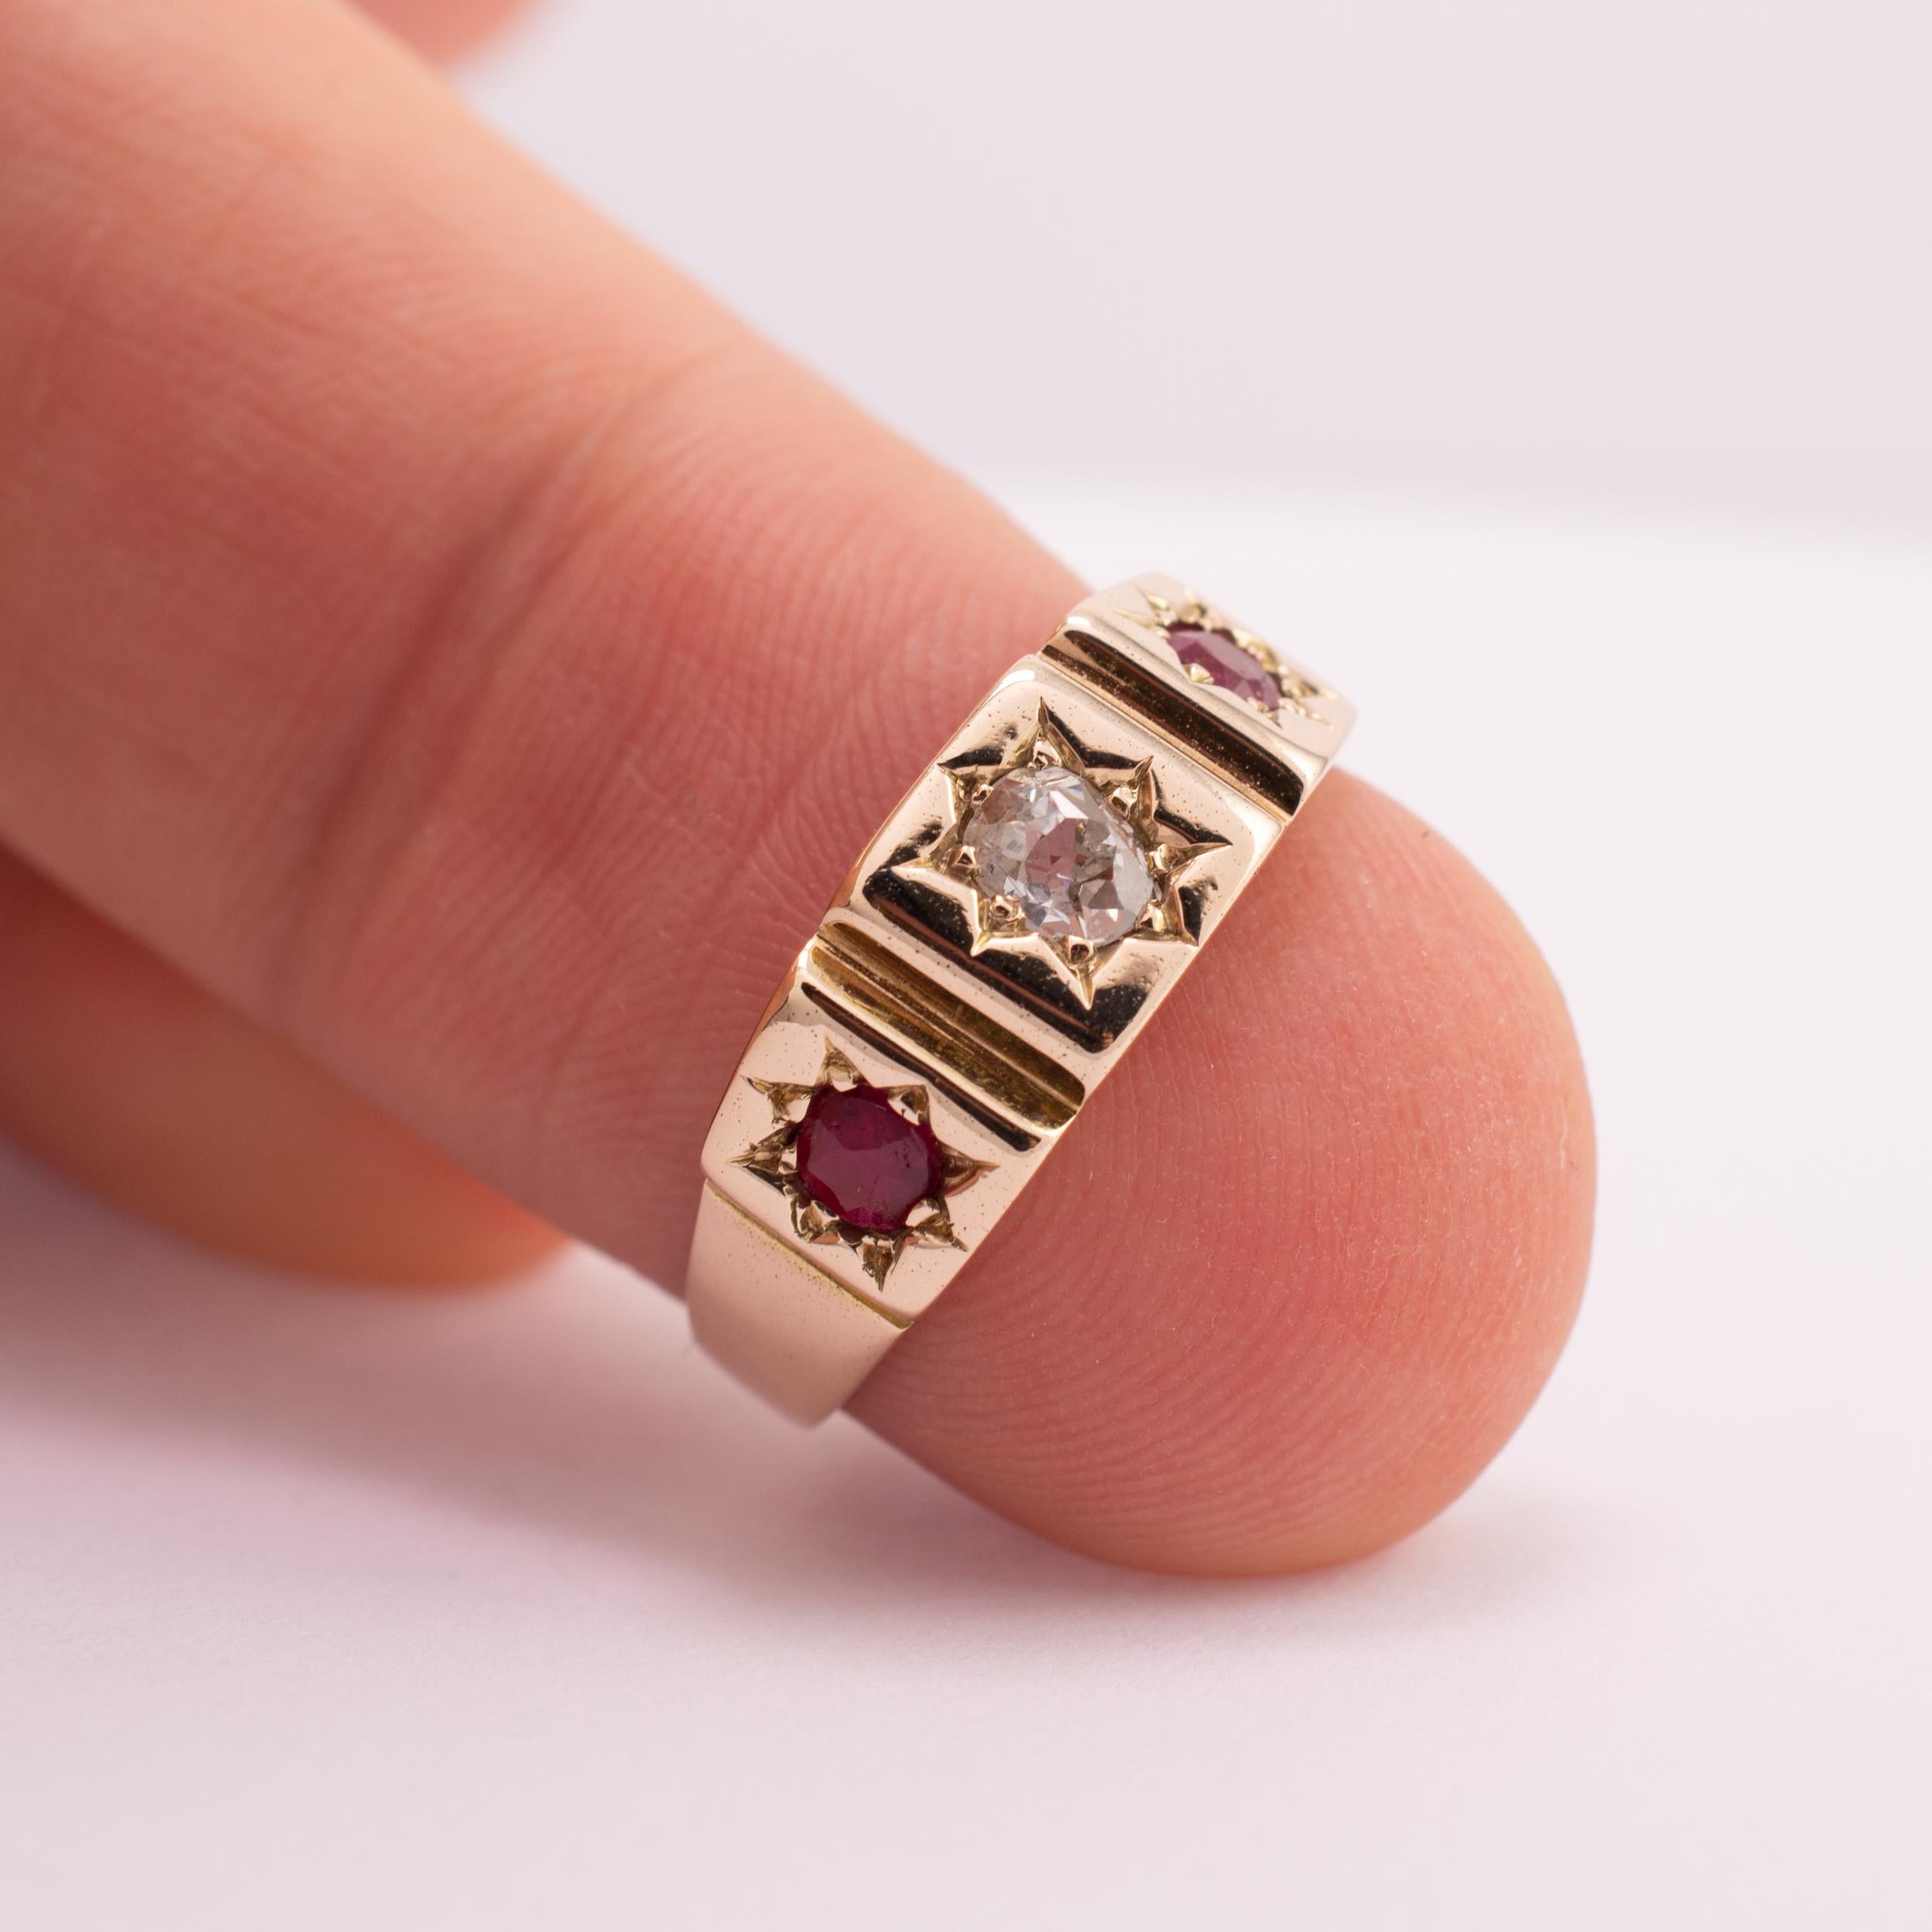 This fine quality antique ruby and diamond ring is crafted in 18 karat gold.

The substantial ring features 1 old cut diamond to the center and flanked either side by rubies. All three gemstones set in stars within individual squared panels to give